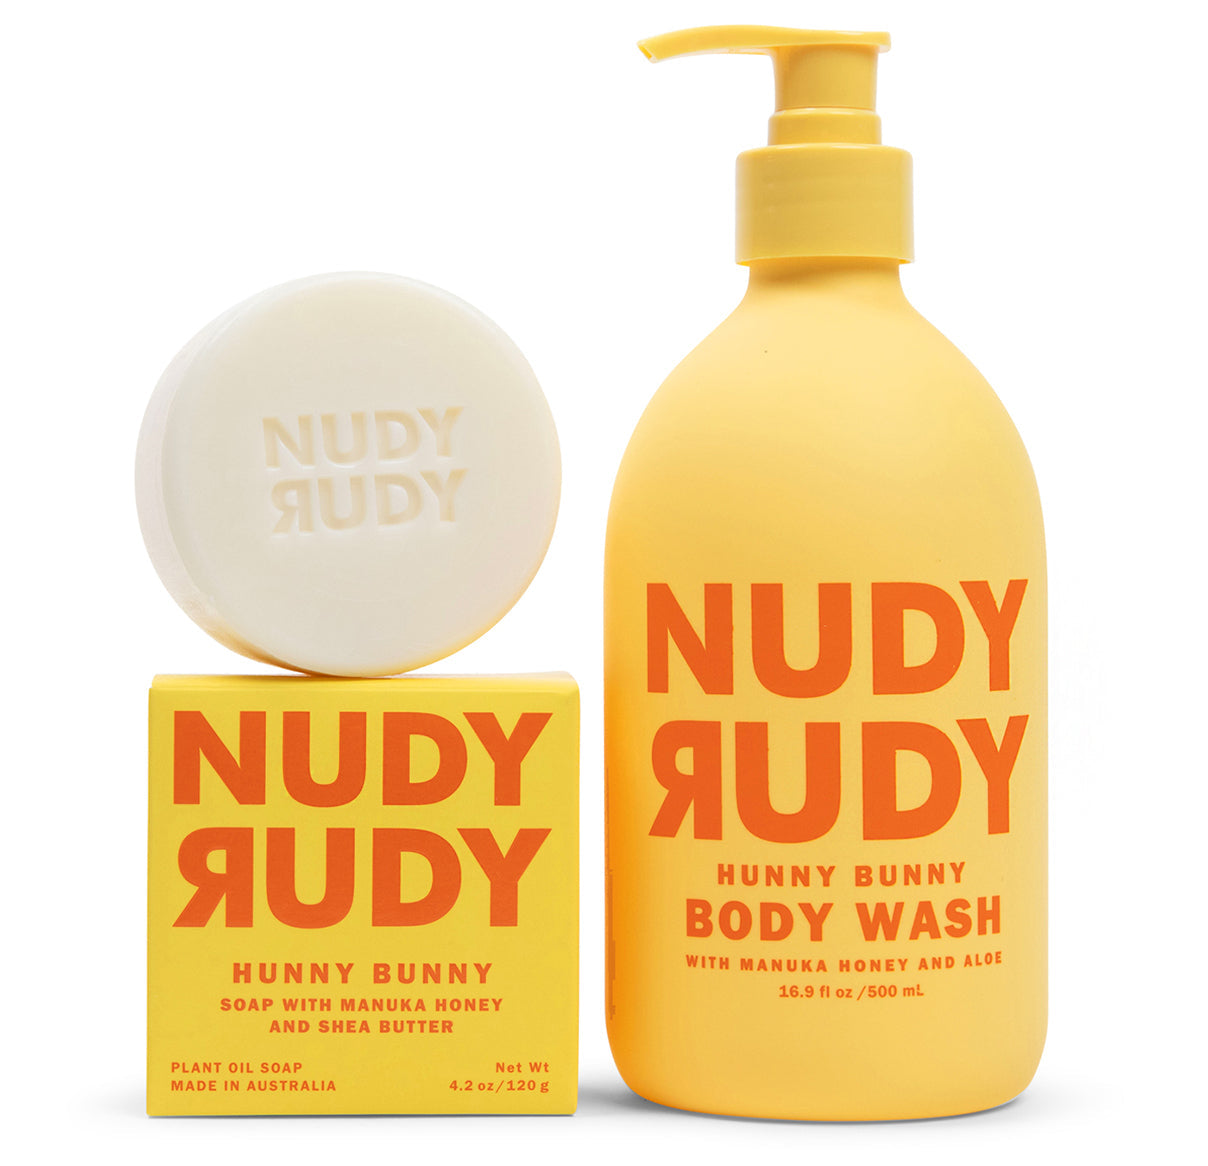 Hunny Bunny Body Wash and Bar Soap Puck Duo - 6 Months